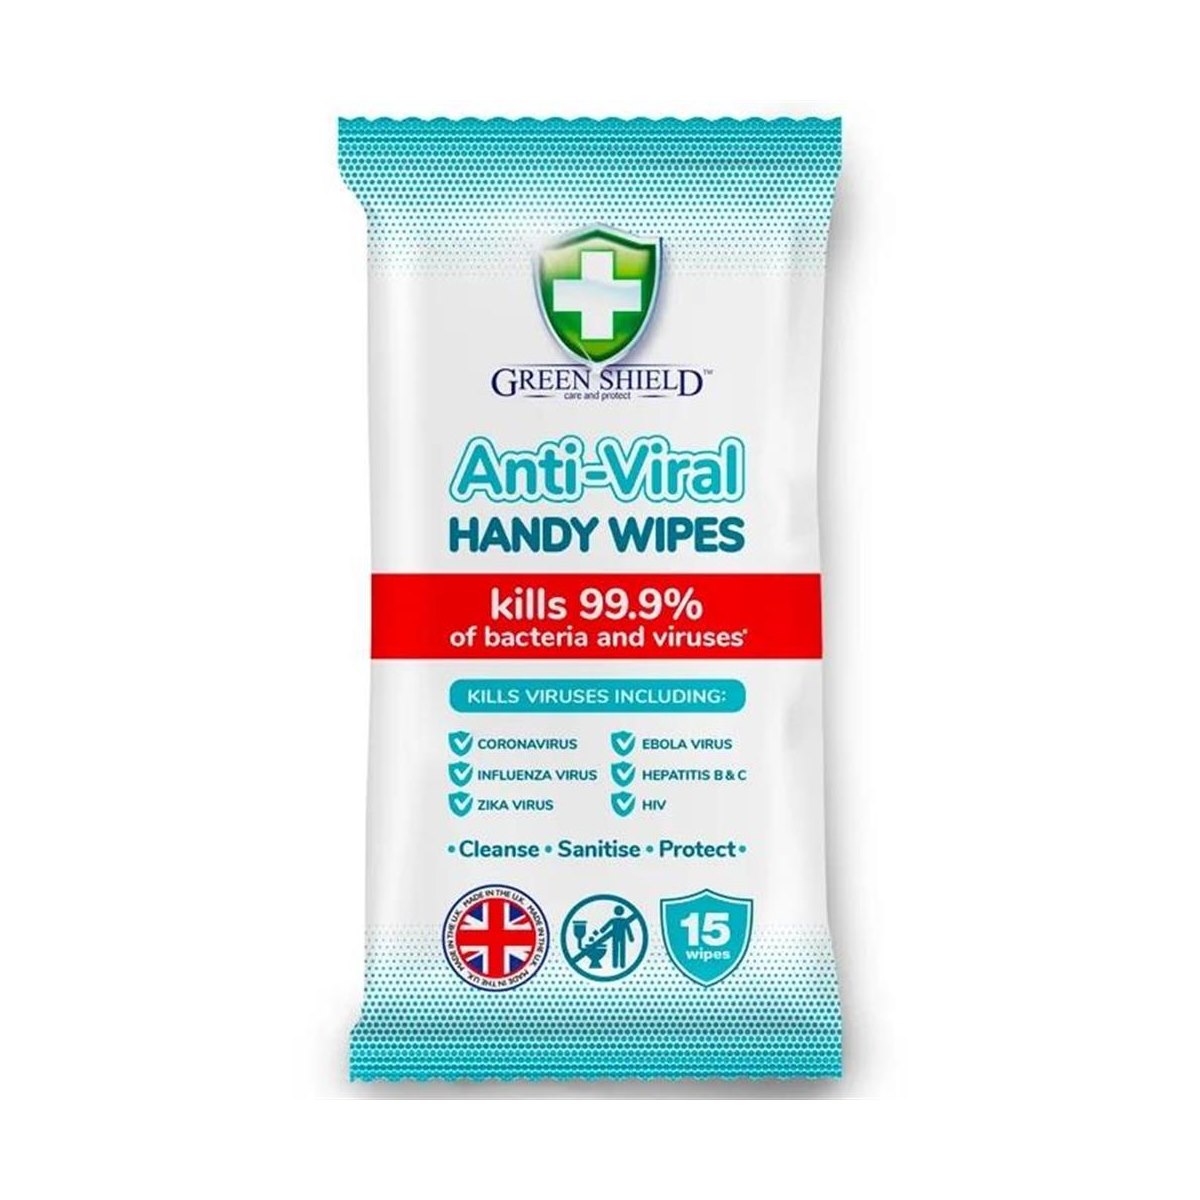 Green Shield Anti-Viral Handy Wipes Travel Size Pack of 15 Wipes